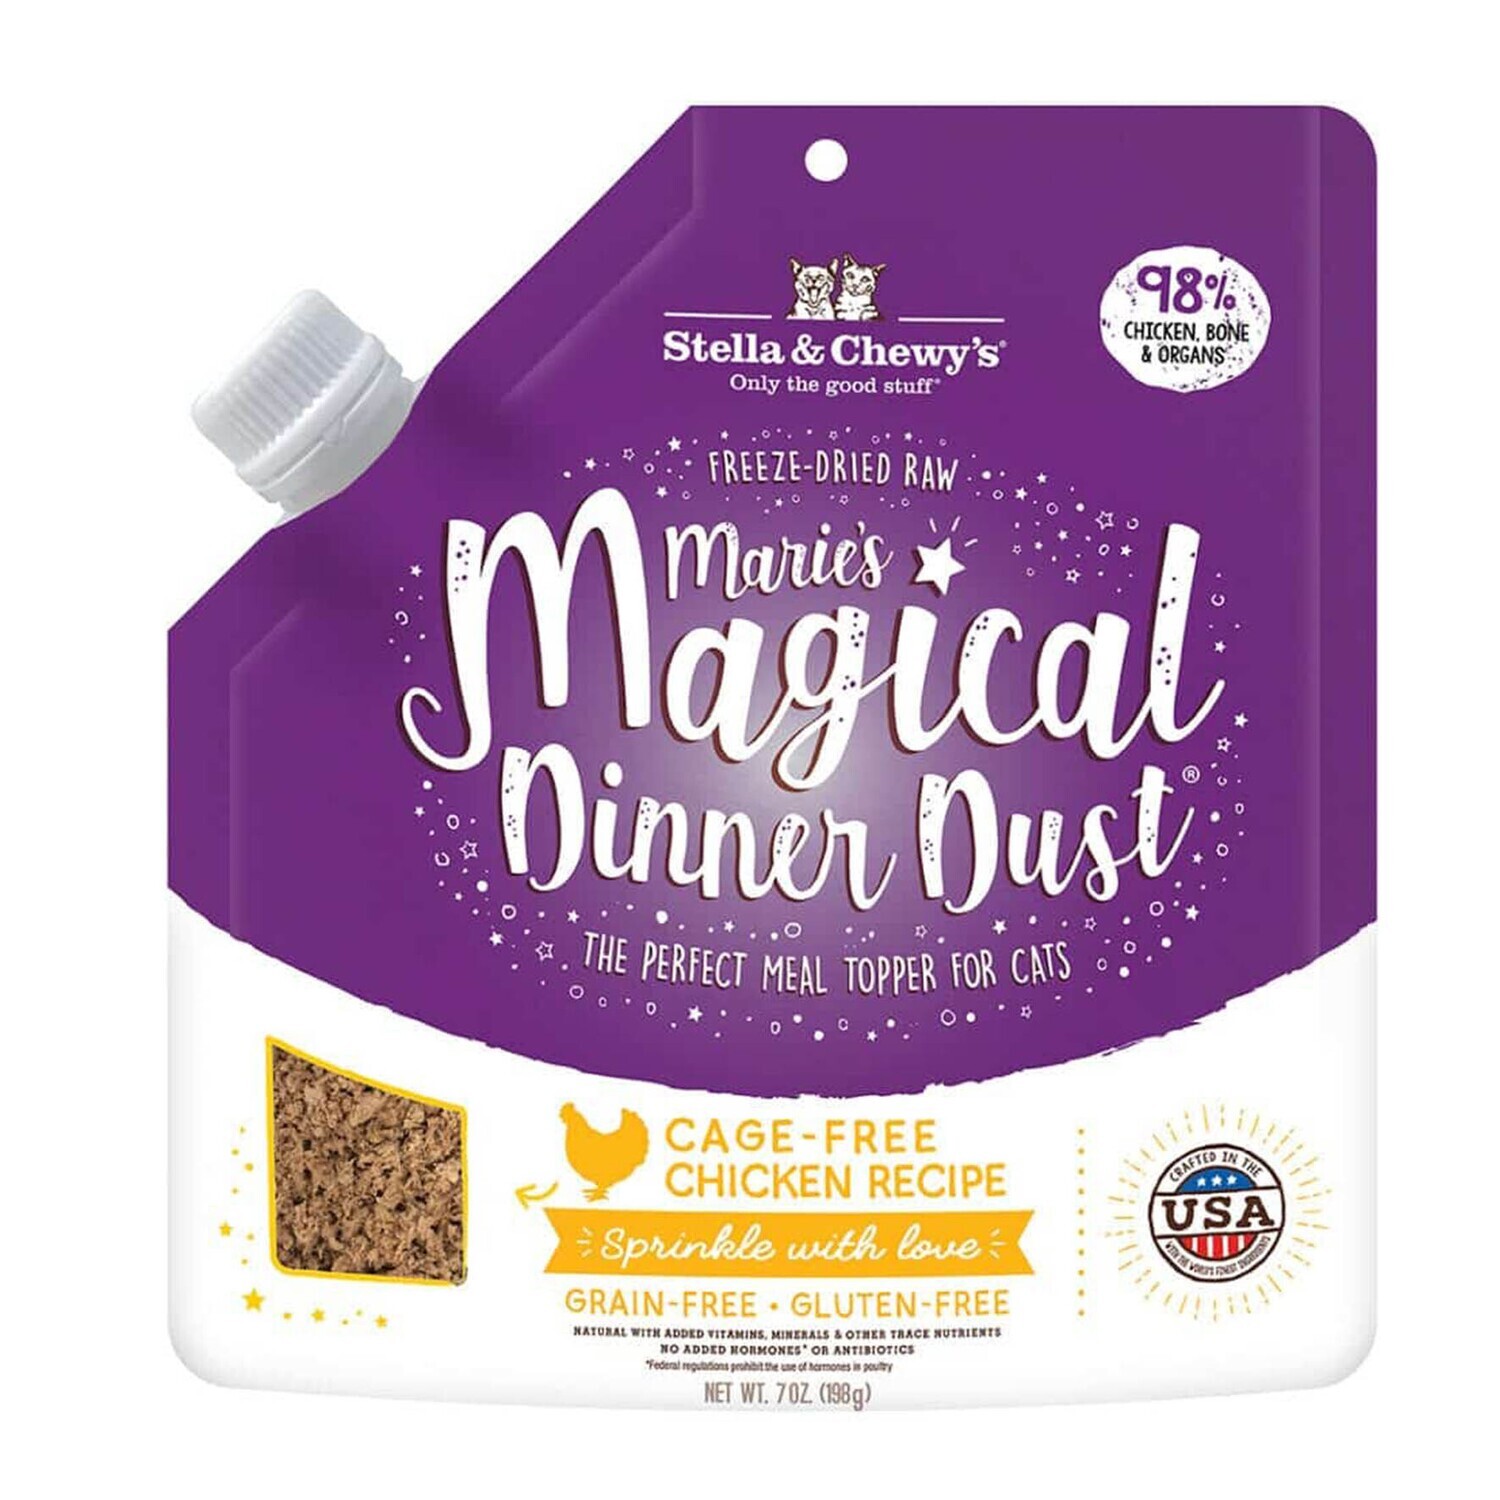 Stella & Chewy Marie's Dinner Dust Cage-free Chicken Freeze Dried For Cat - 7oz - 猫猫走地鸡冻干拌饭粉